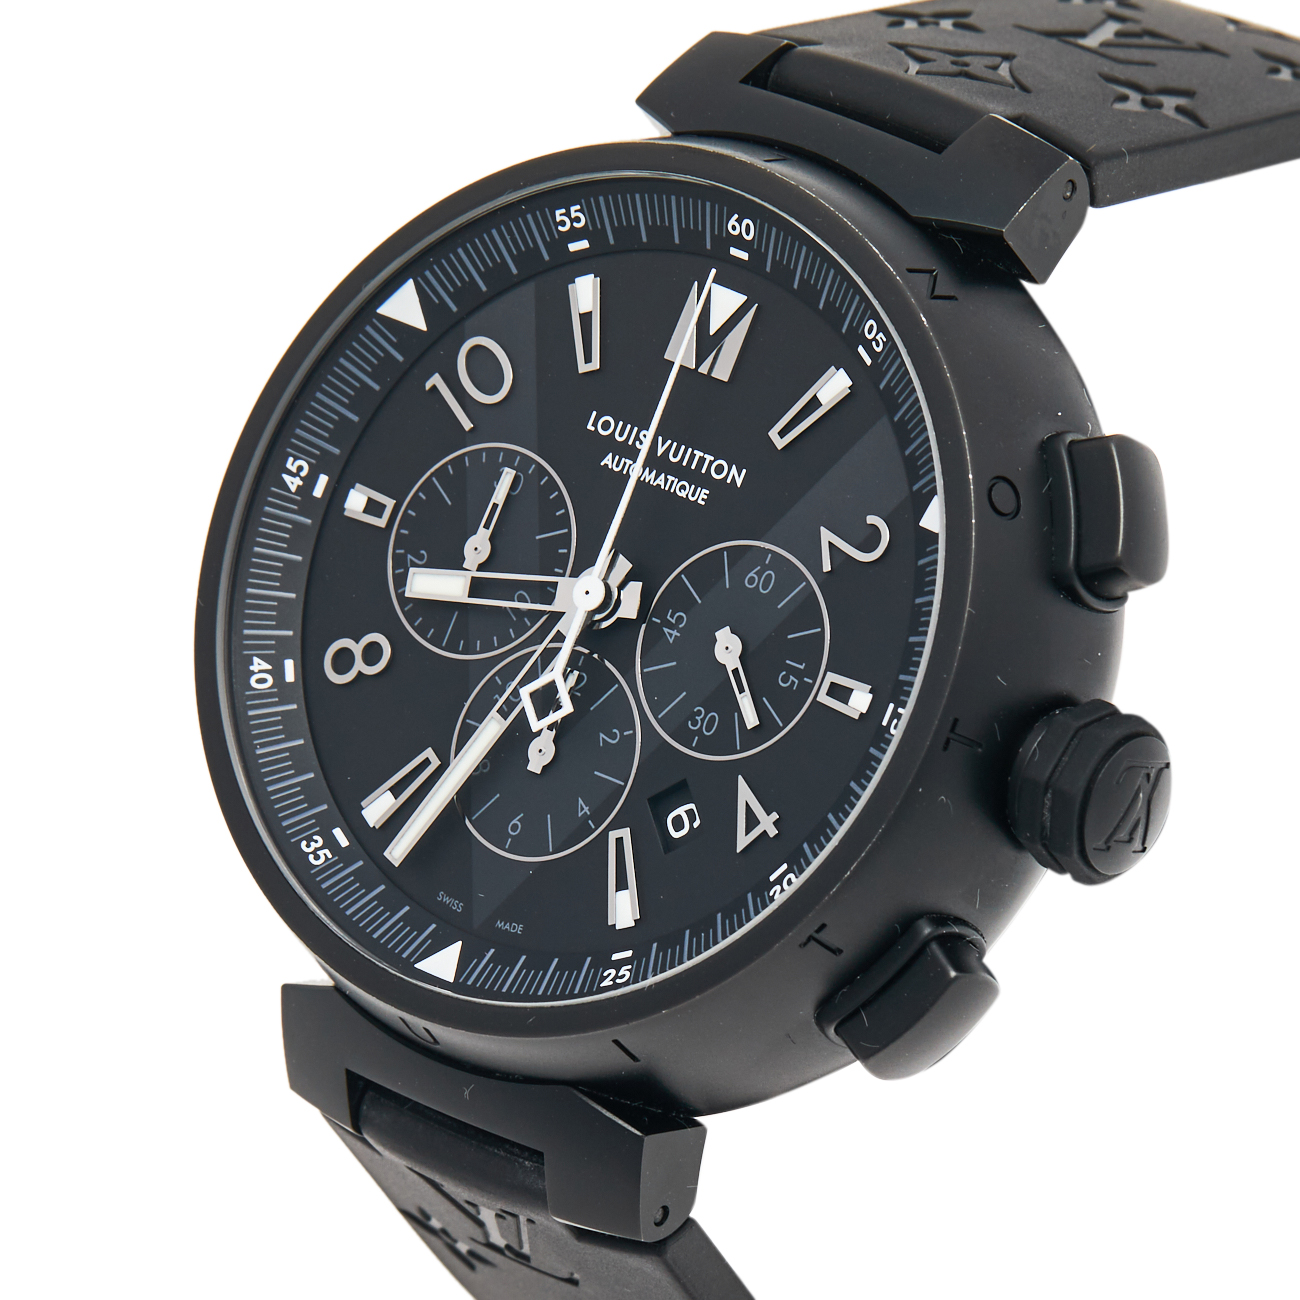 

Louis Vuitton Black PVD Coated Stainless Steel Rubber Tambour Chronograph Q1A62 Men's Wristwatch